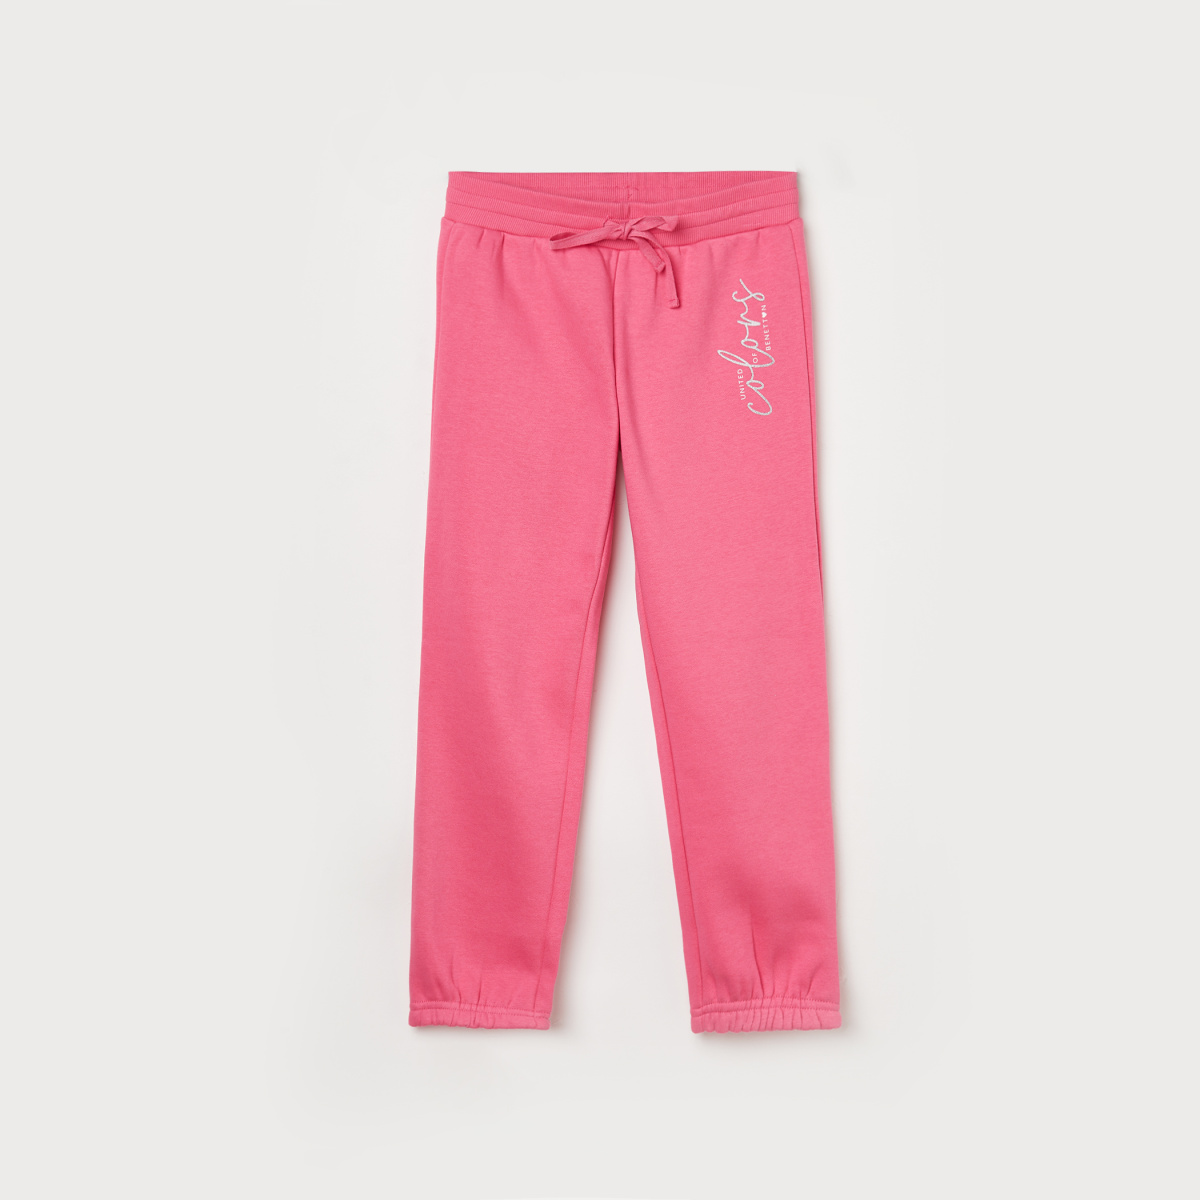 UNITED COLORS OF BENETTON Girls Printed Track Pants